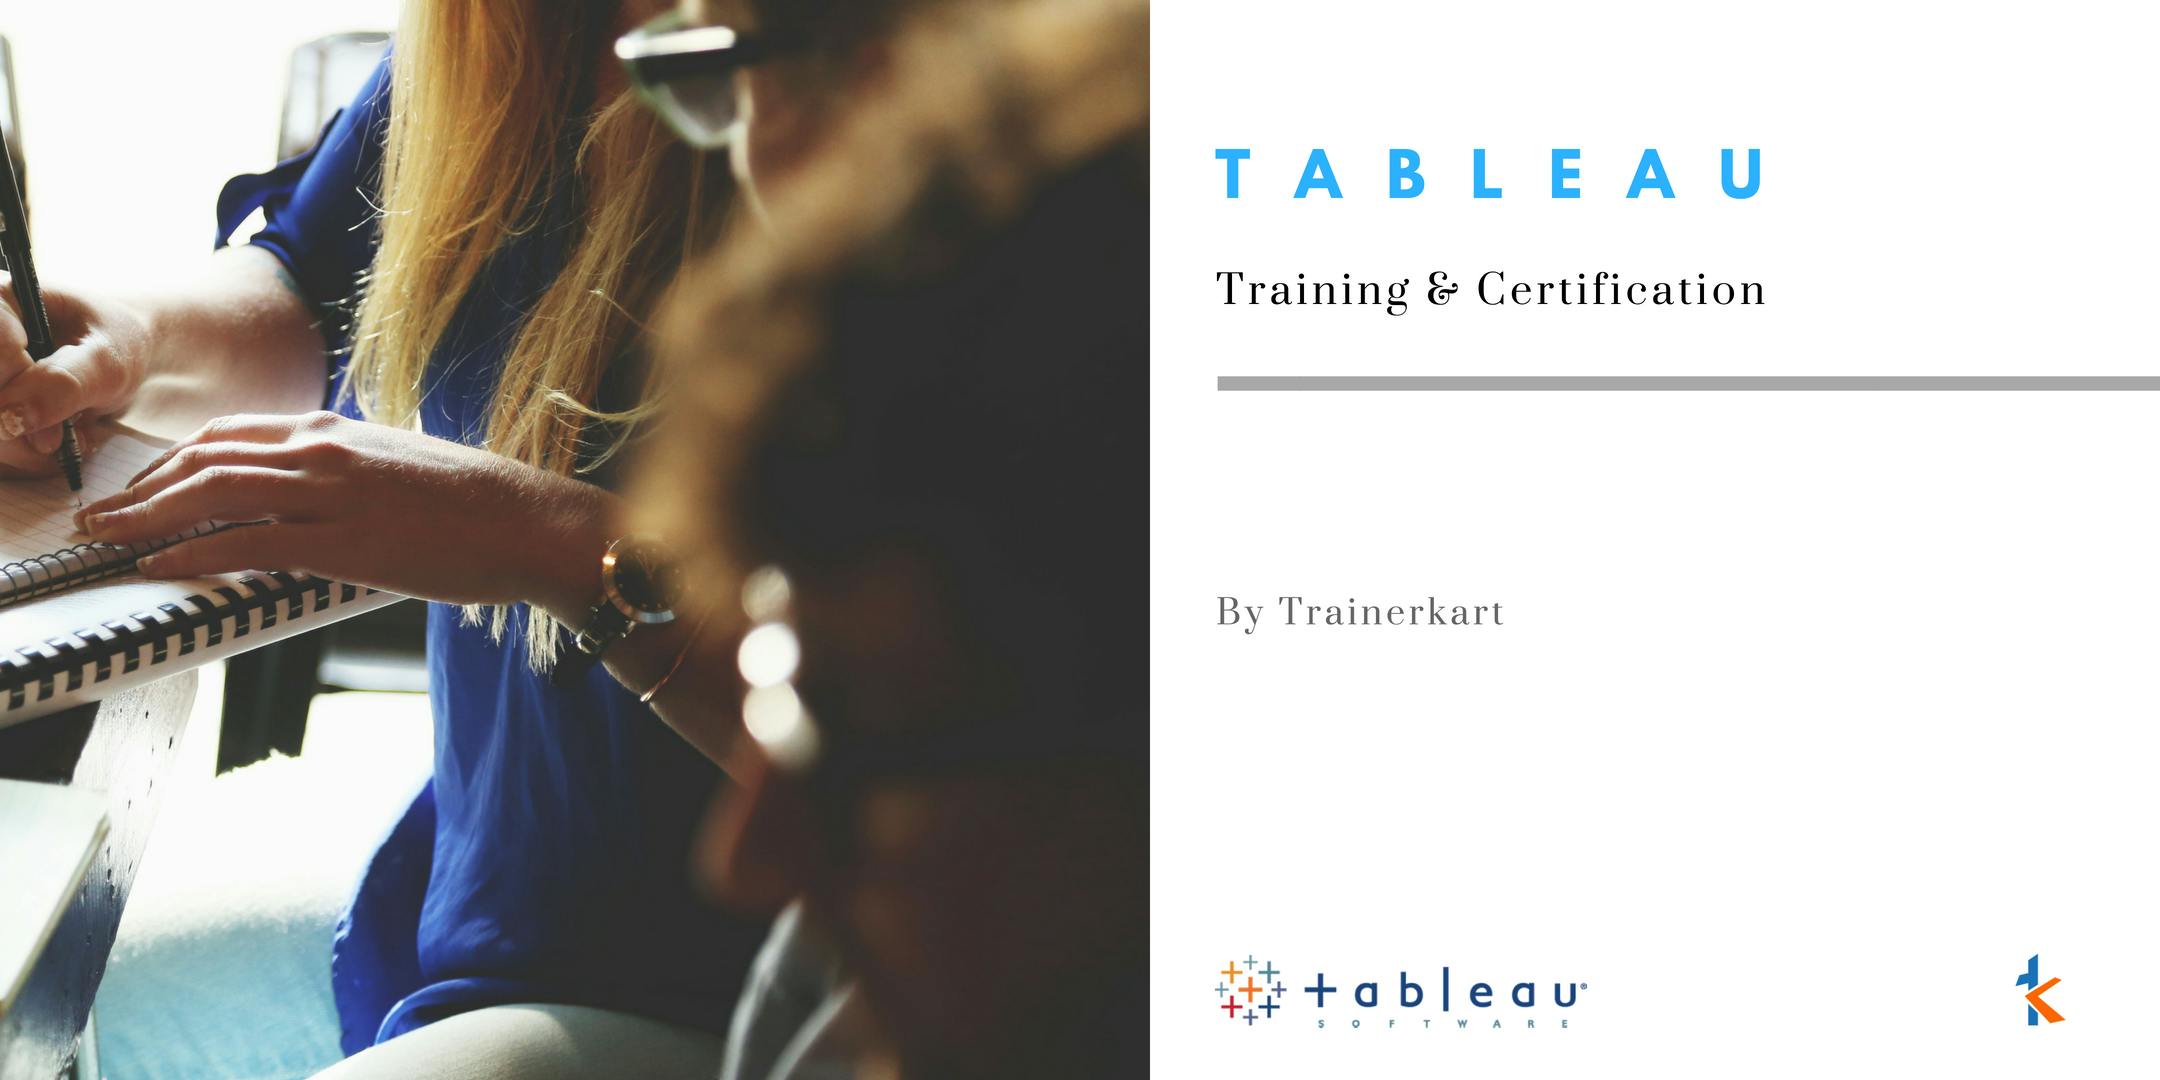 Tableau Classroom Training & Certification in Ithaca, NY